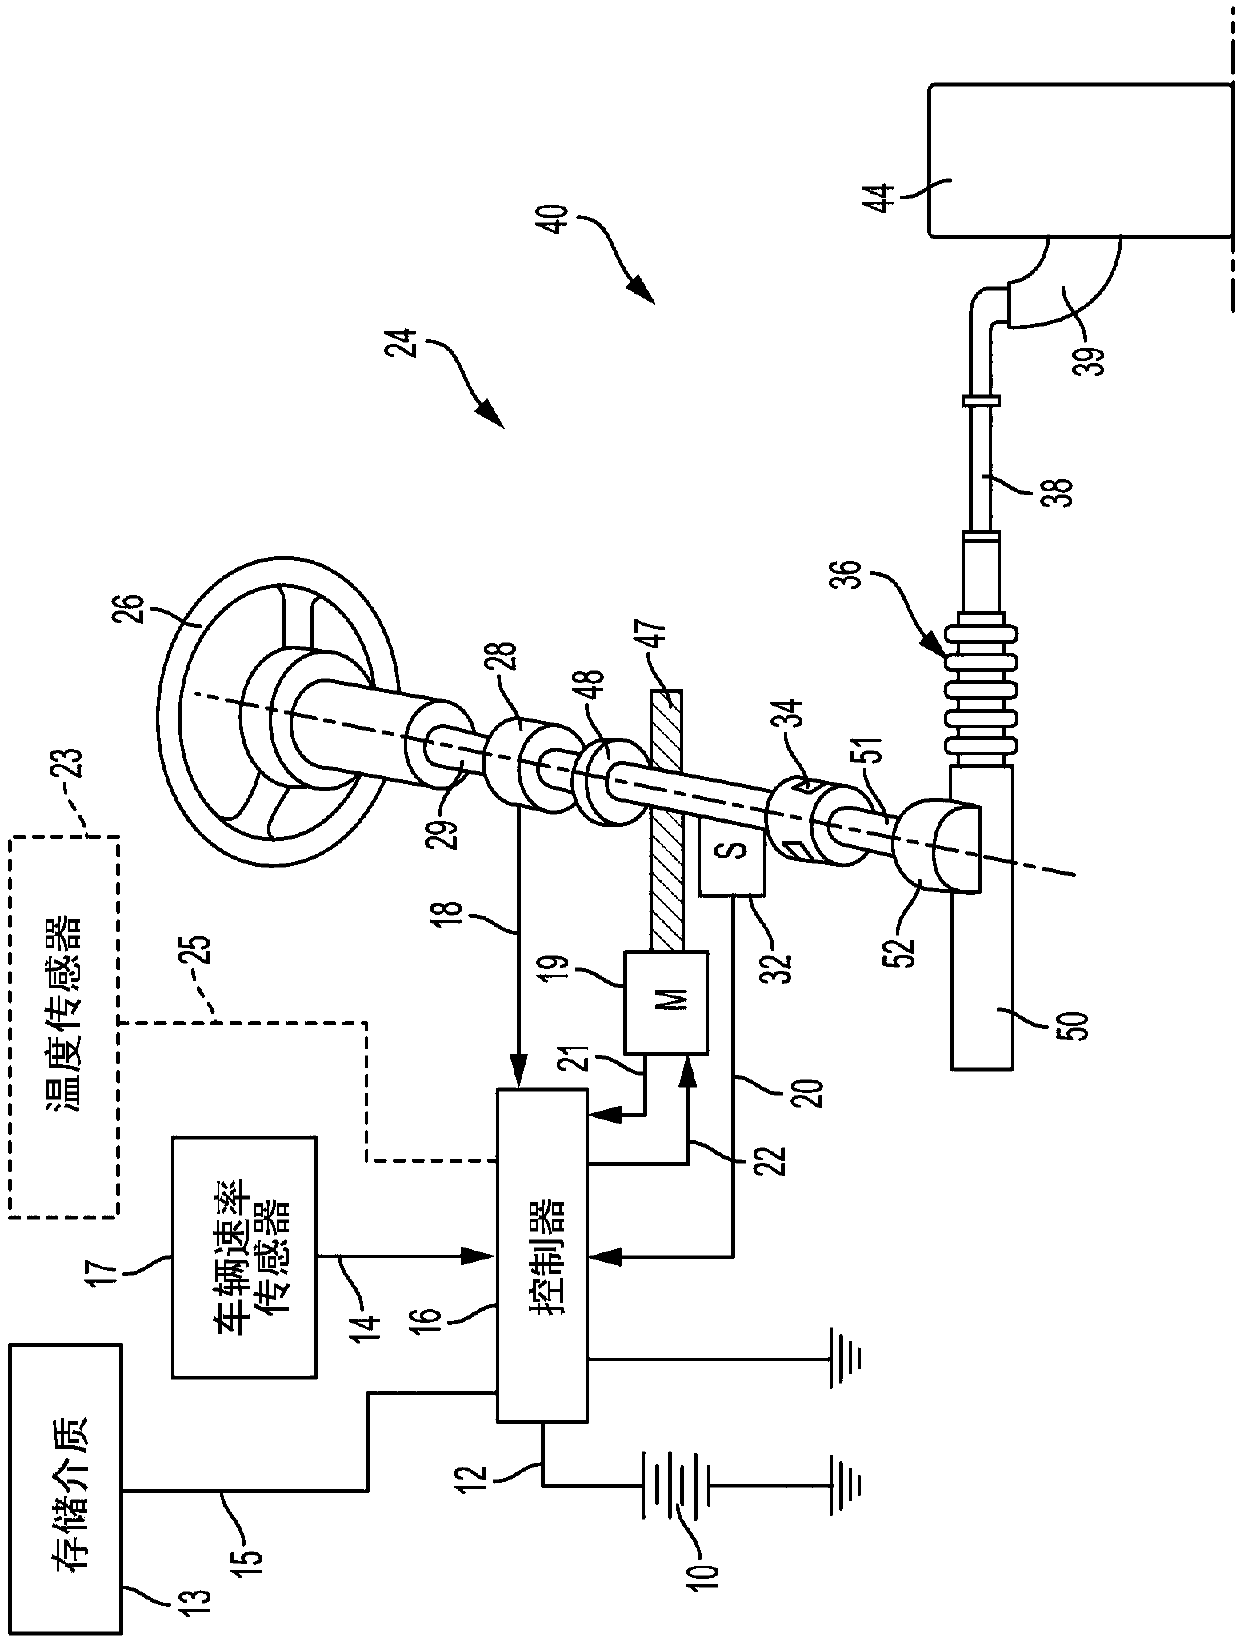 Current sensor fault mitigation for steering systems with permanent magnet DC drives